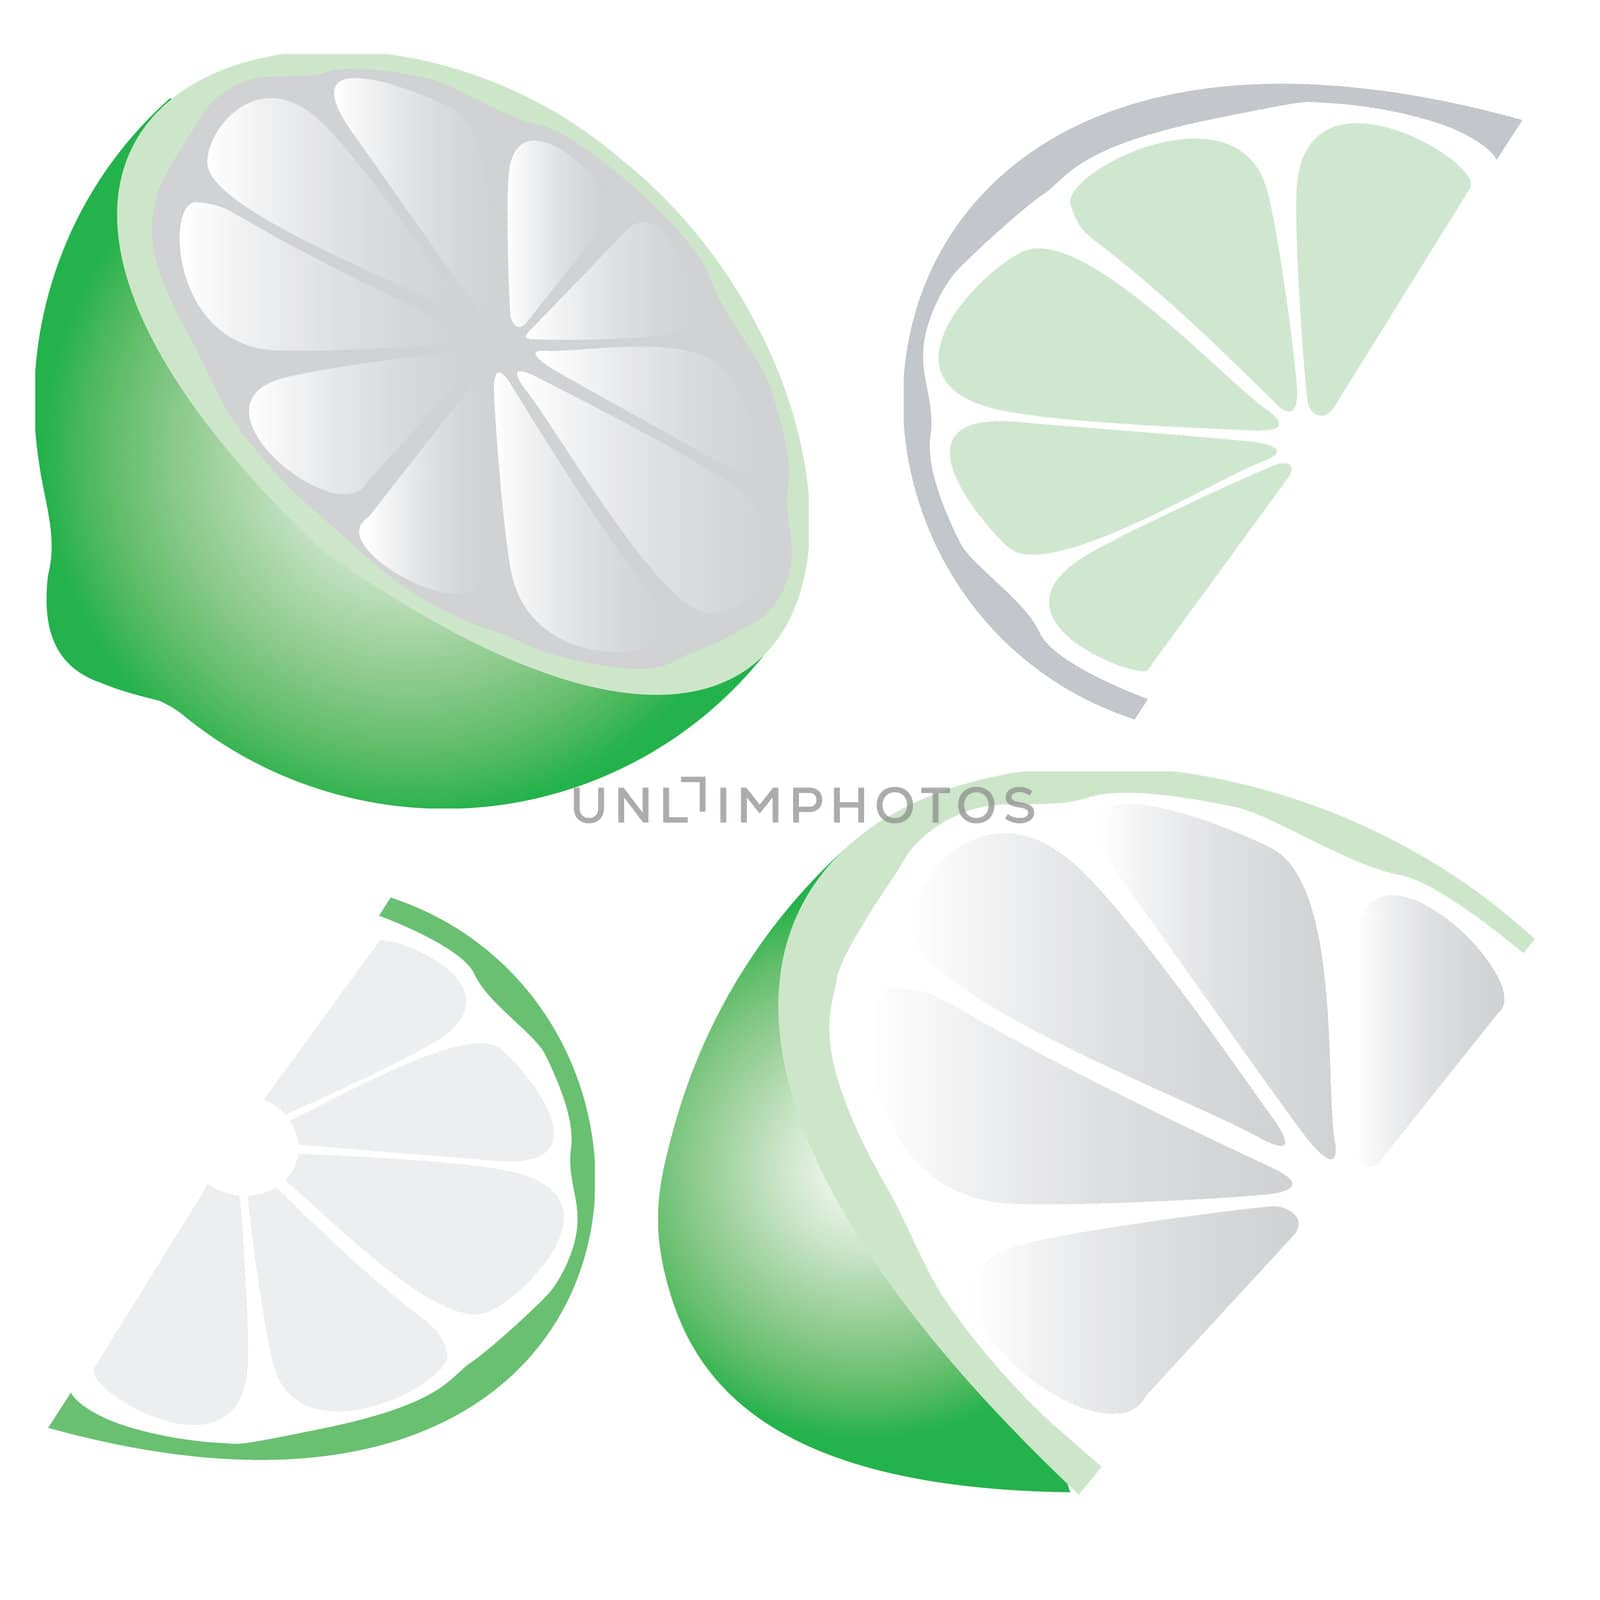 A drawing of some green lime slices.